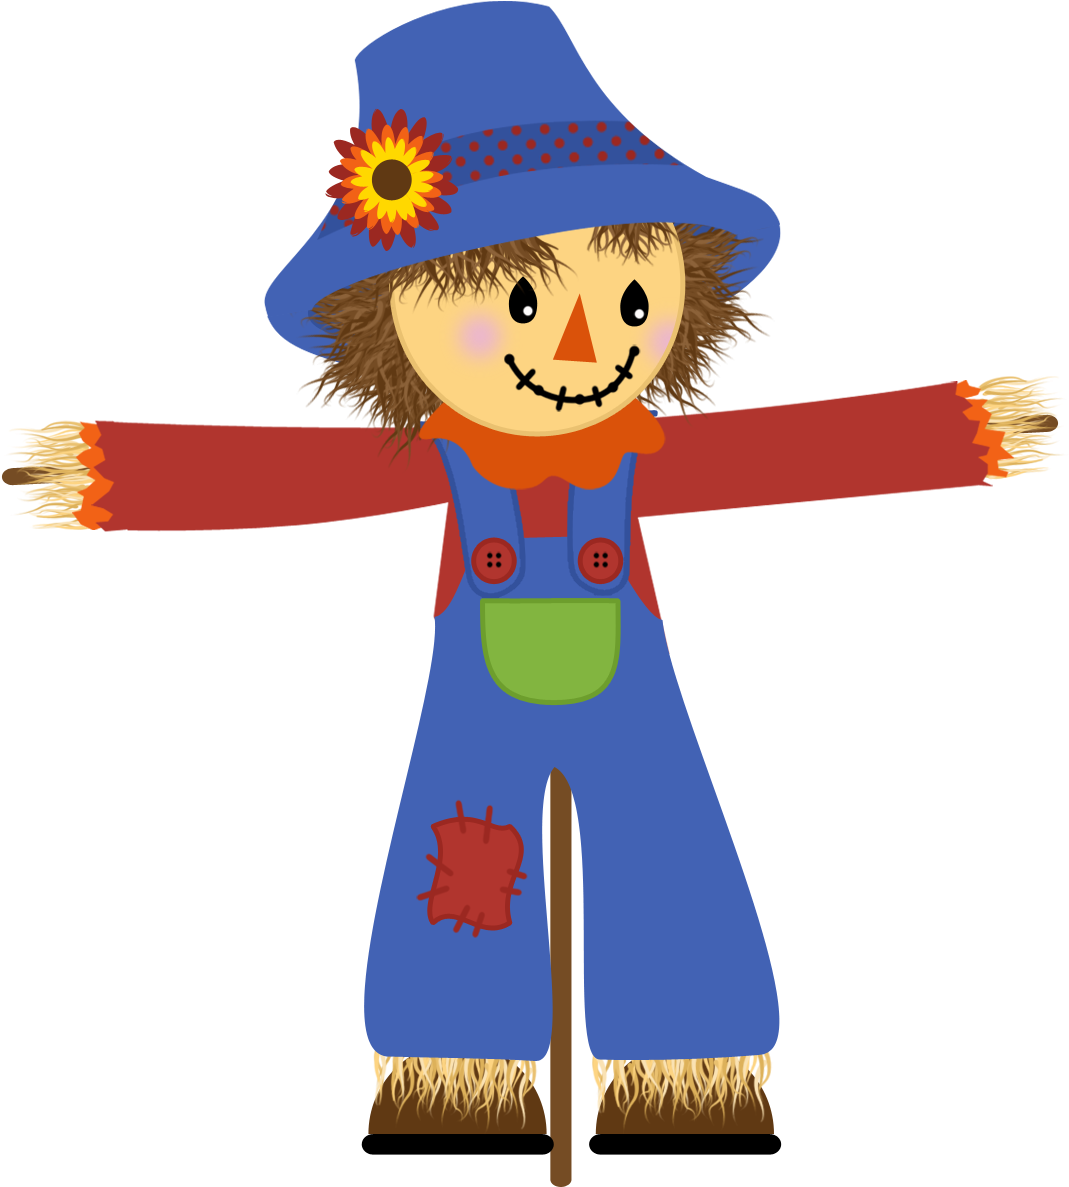 10 Scarecrow Clip Art Free Cliparts That You Can Download - Scarecrow Clip Art (1080x1200)